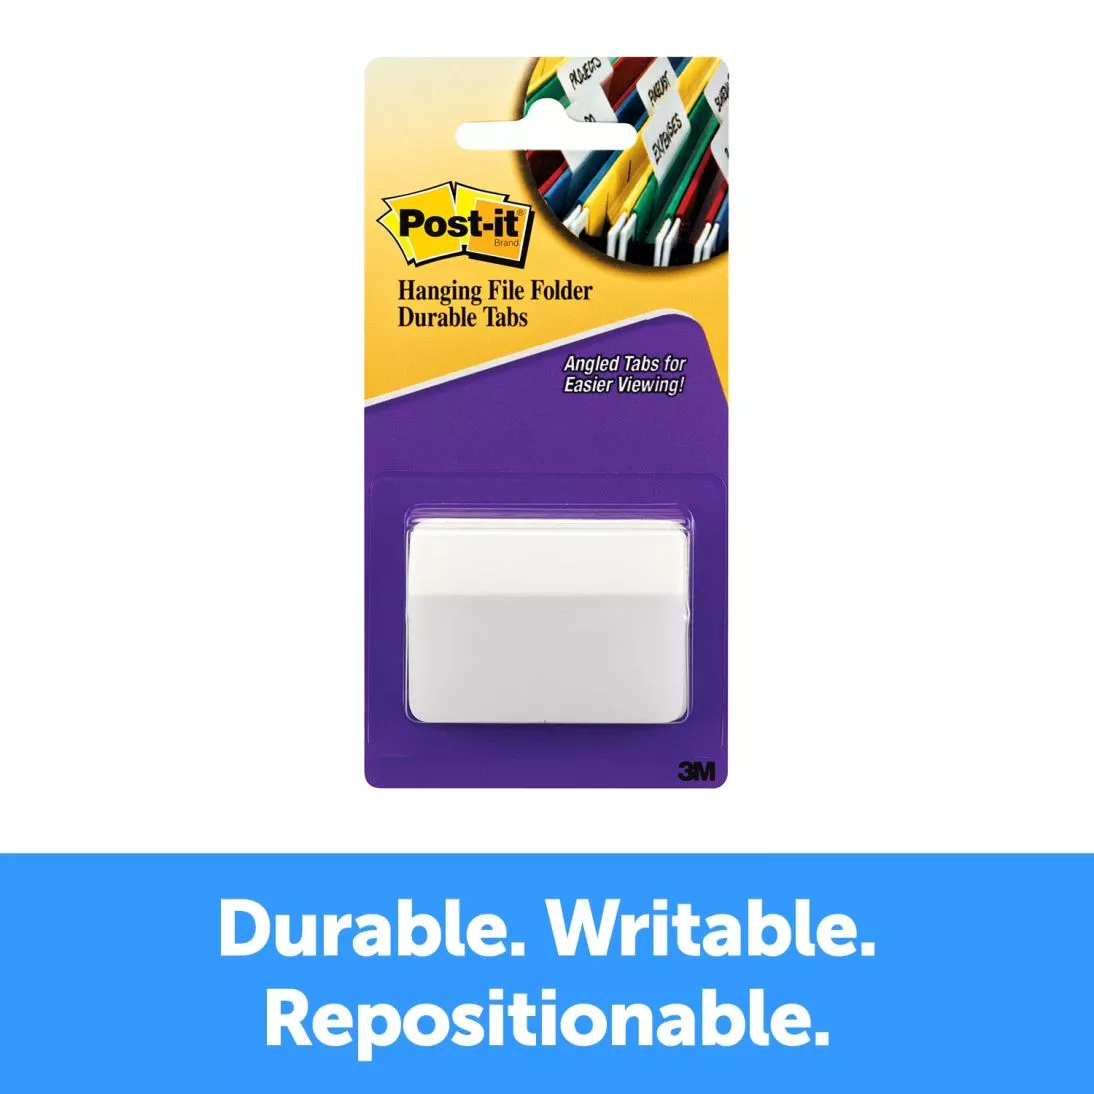 Post-it® Angled Durable Tabs 686A-50WH, 2 in. x 1.5 in. (50,8 mm x 38
mm) White 24 pk/cs